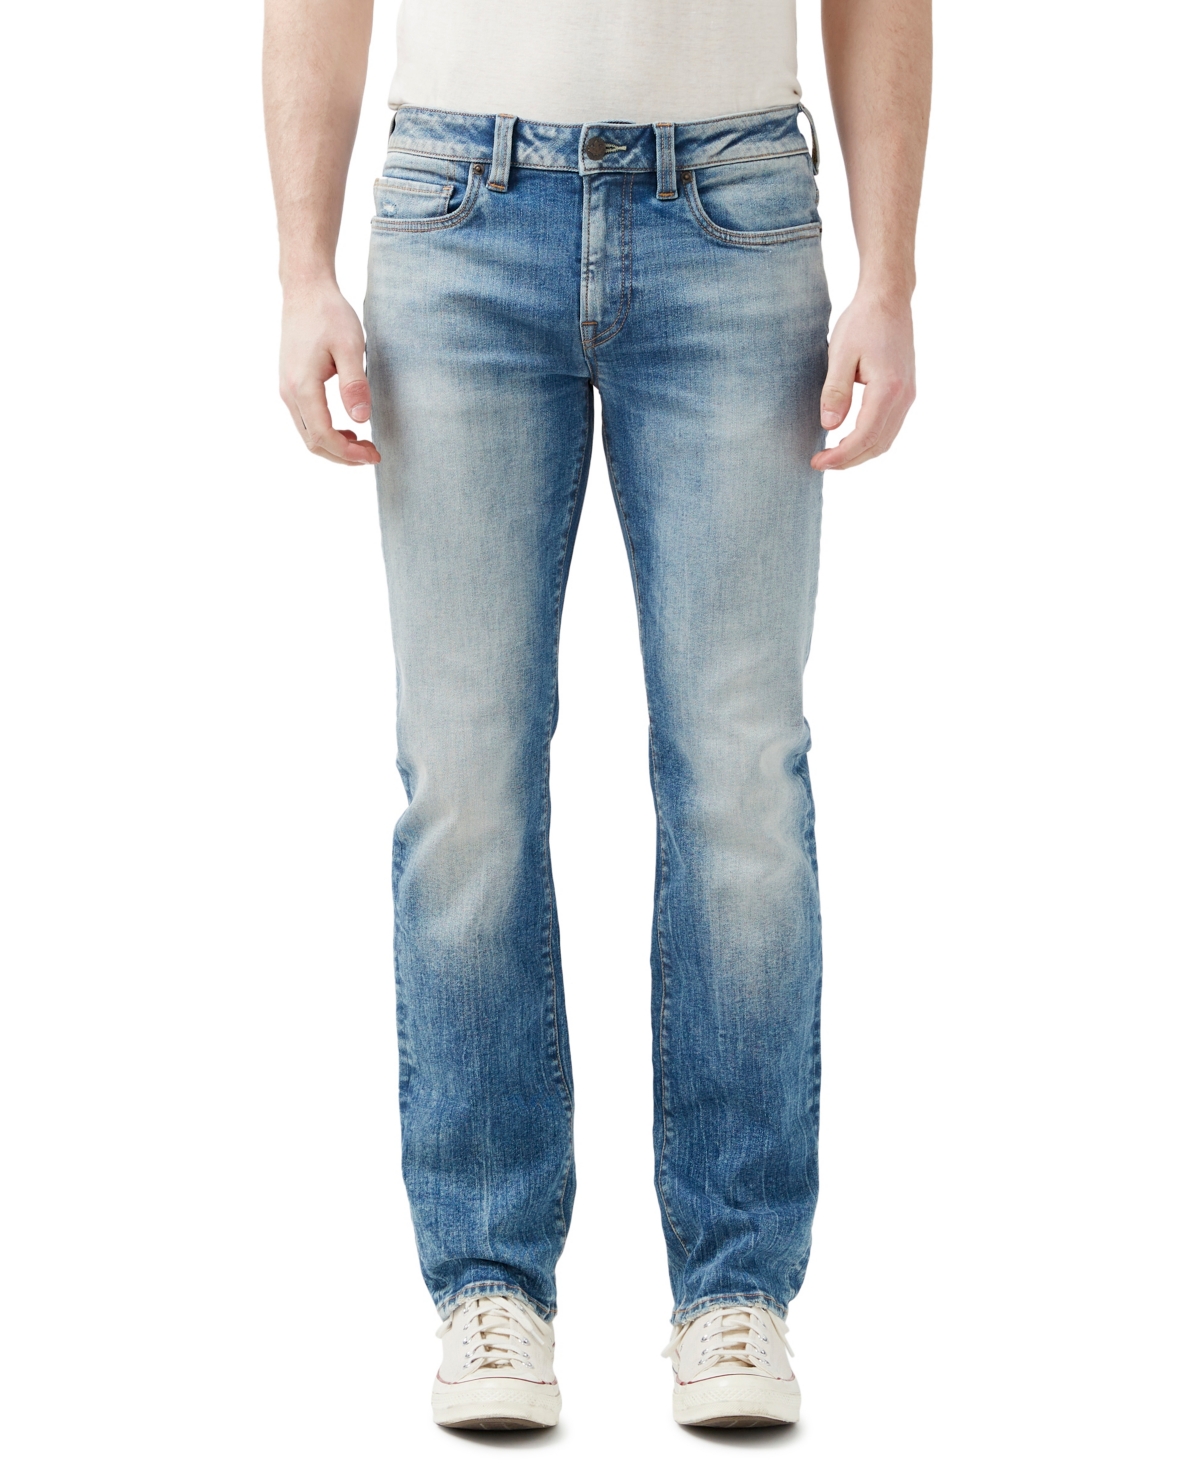 BUFFALO DAVID BITTON MEN'S STRAIGHT SIX VEINED AND CONTRASTED JEANS